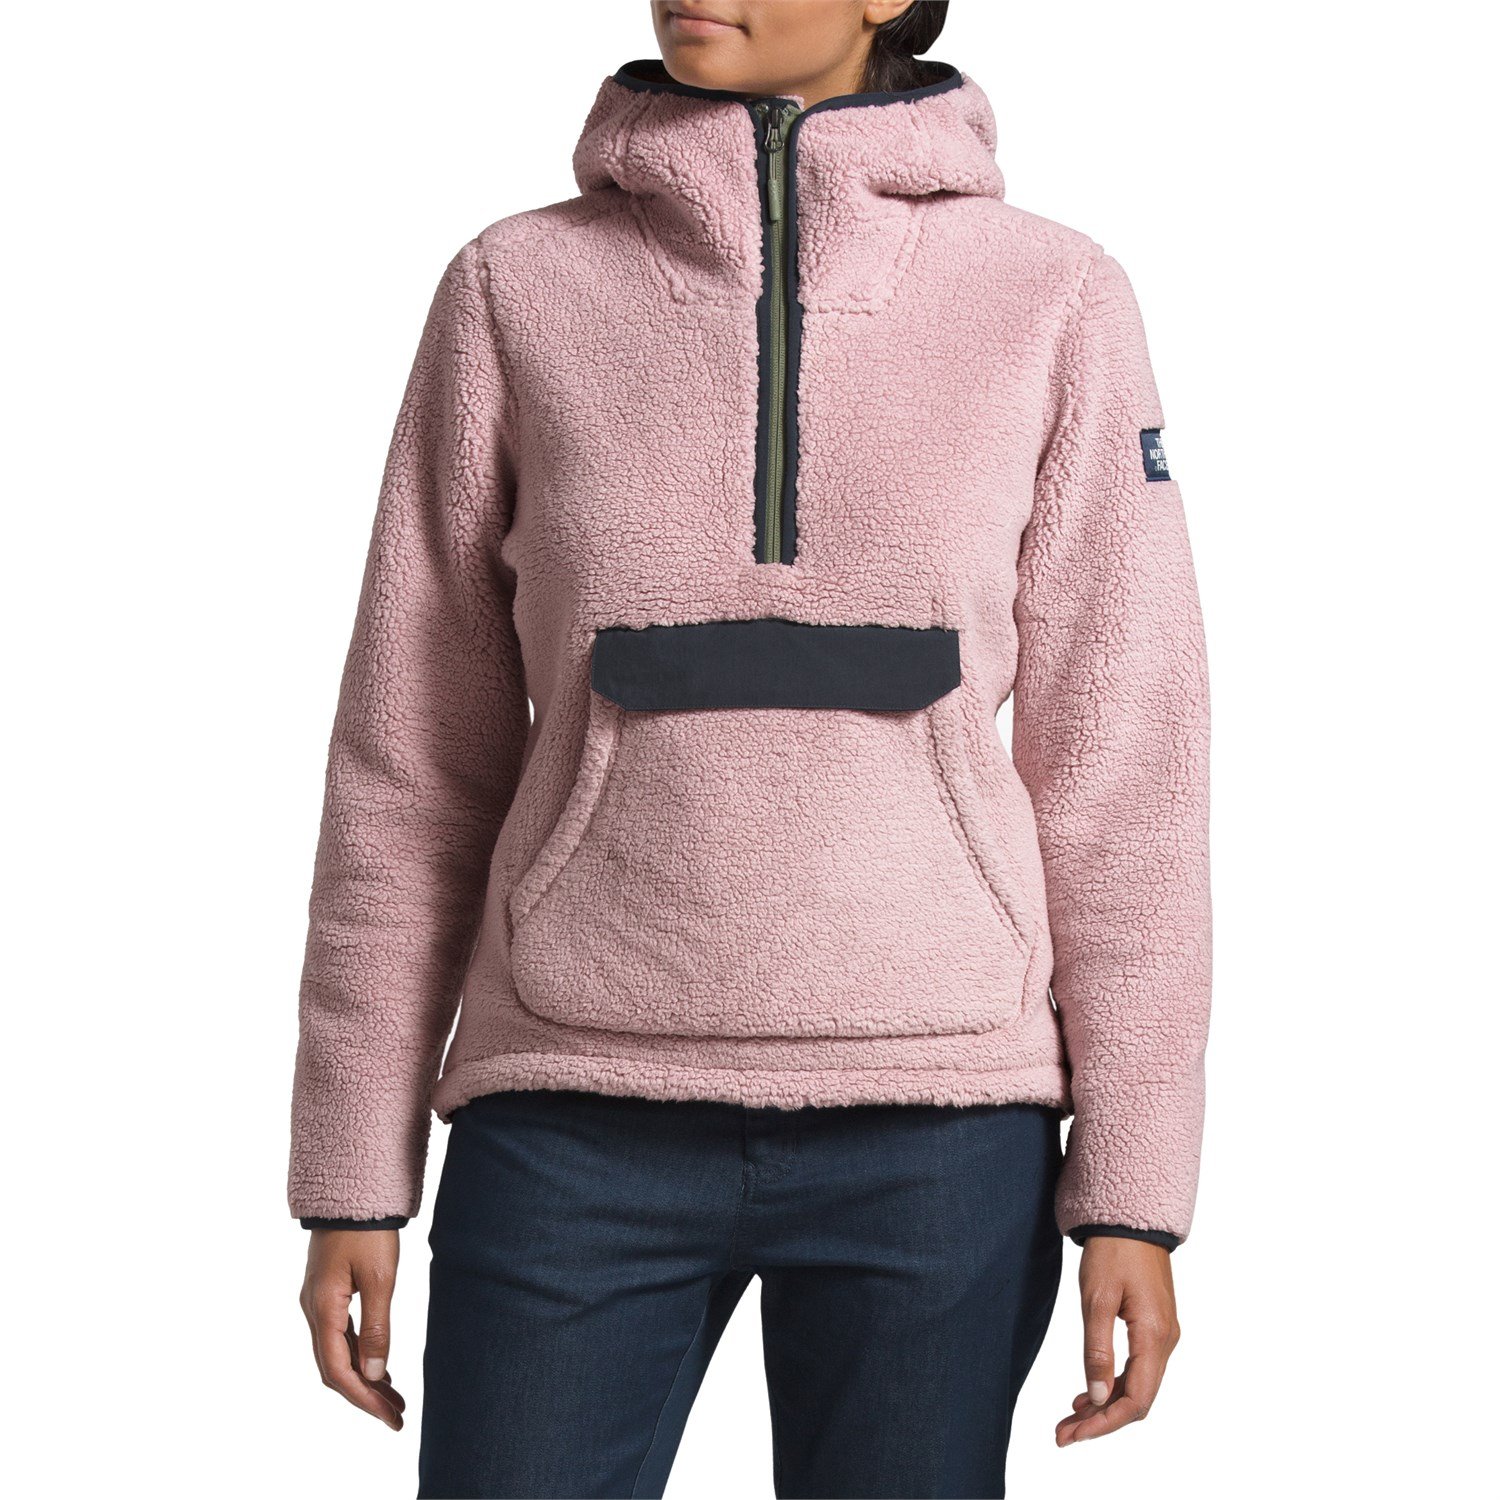 the north face pink hoodie